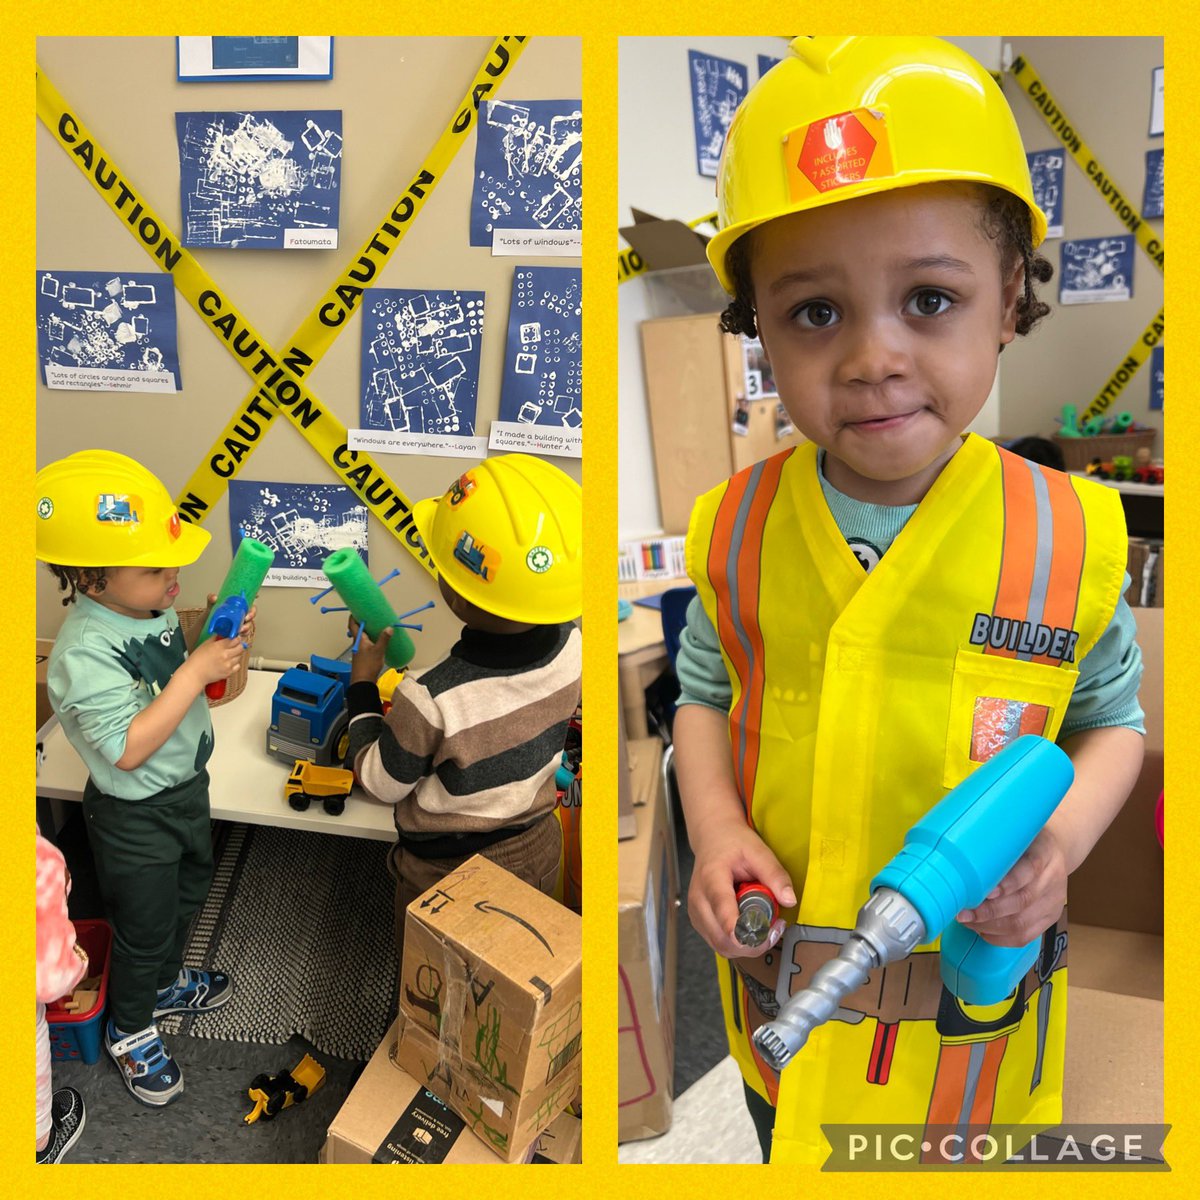 Joan Snow/Glenwood 3K students are getting ready to explore our new topic on “Buildings” with fun role play and a taste of design. #Reimaginelearning @Rosaliefav @District22BKNY @DOEChancellor @NYCSchools @Stu_chasabenis @NYCCouncil